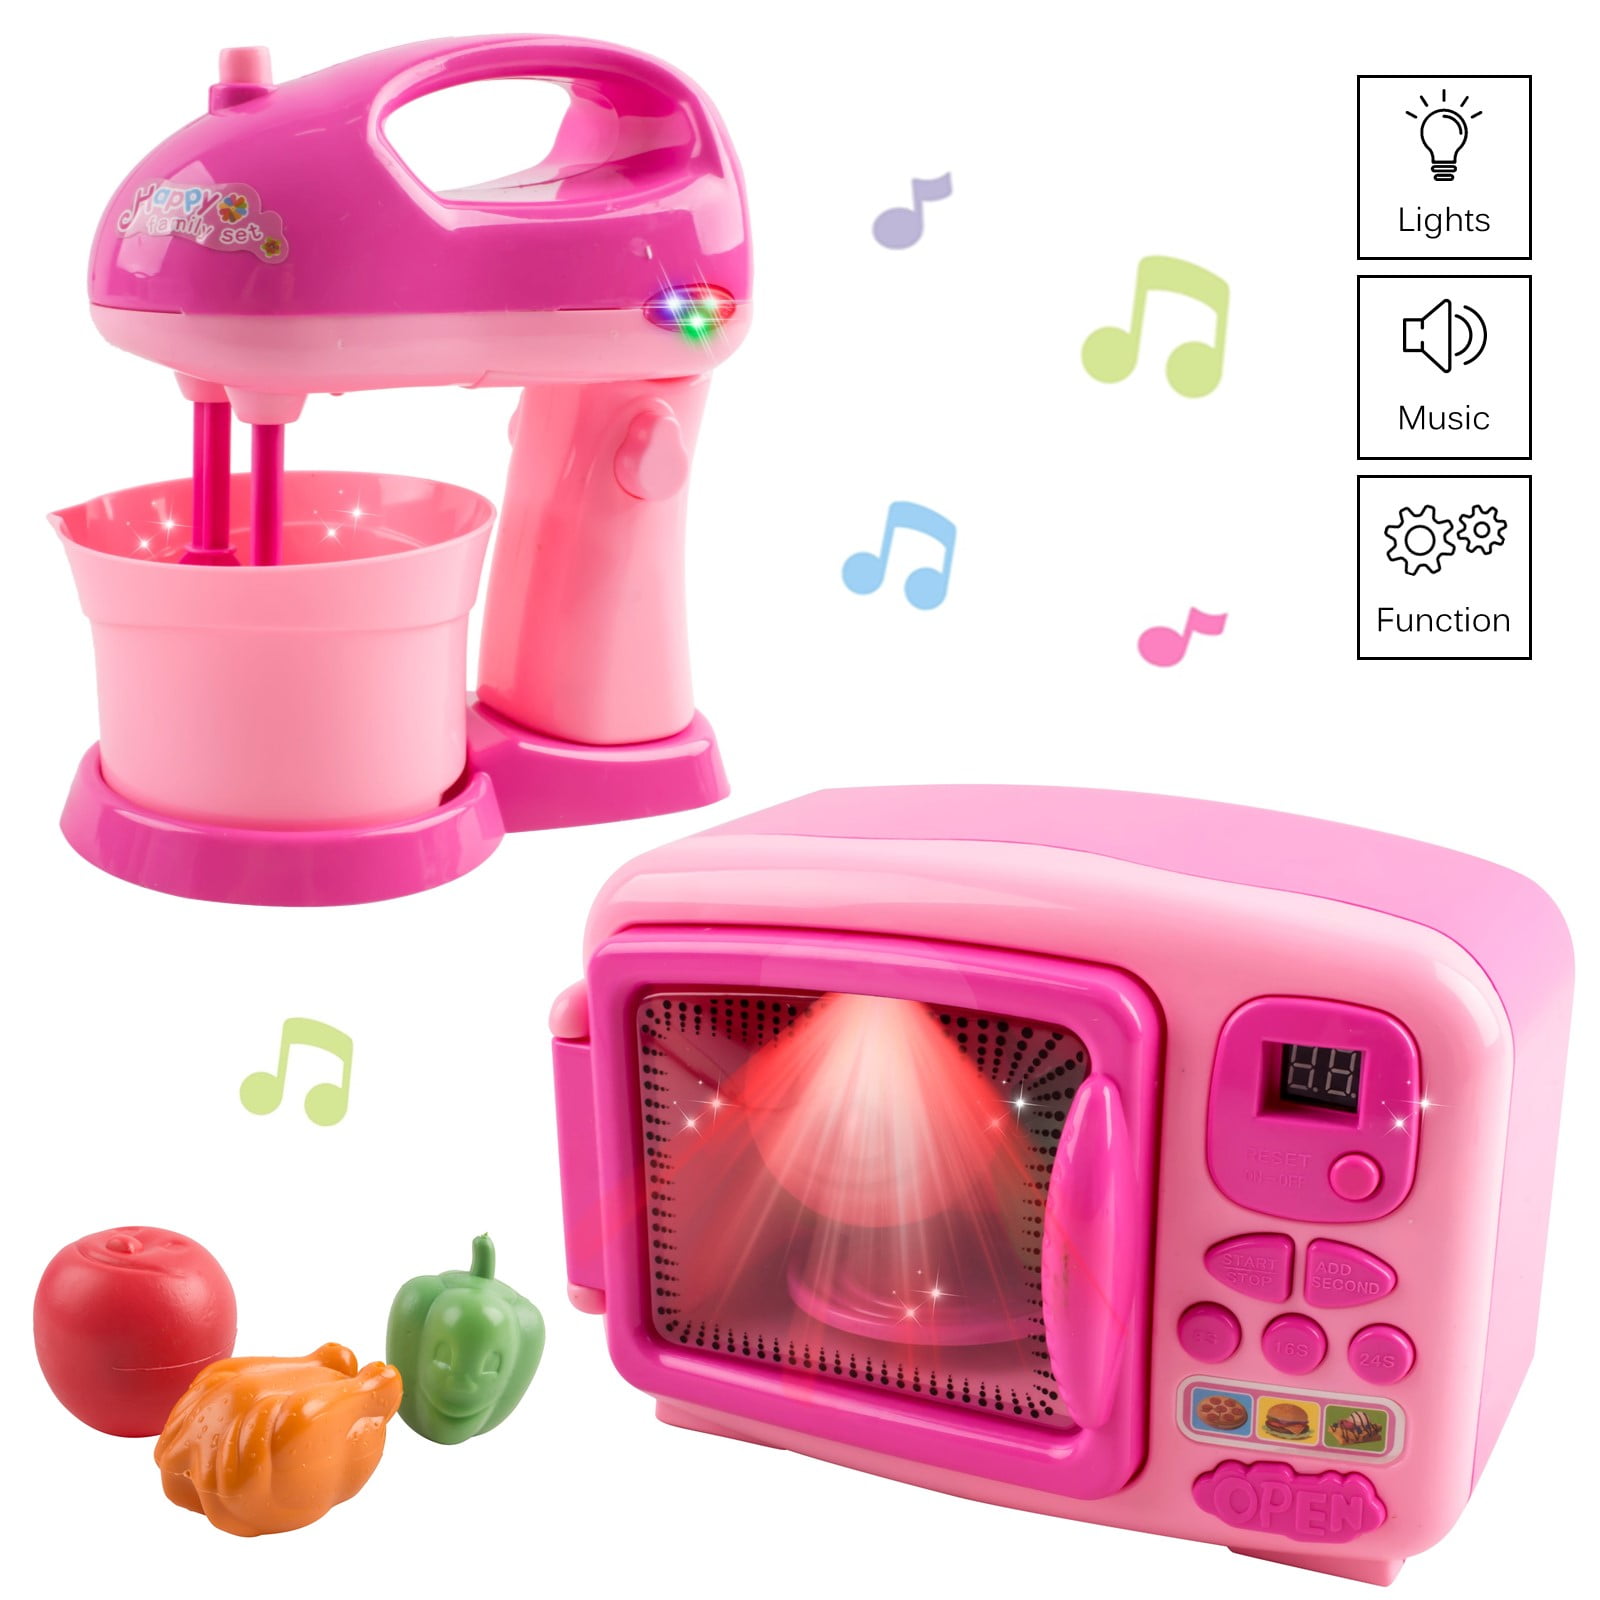 Pretend Play Kitchen Microwave Oven Set Home Kids Miniature Food Cooker Toys USA 